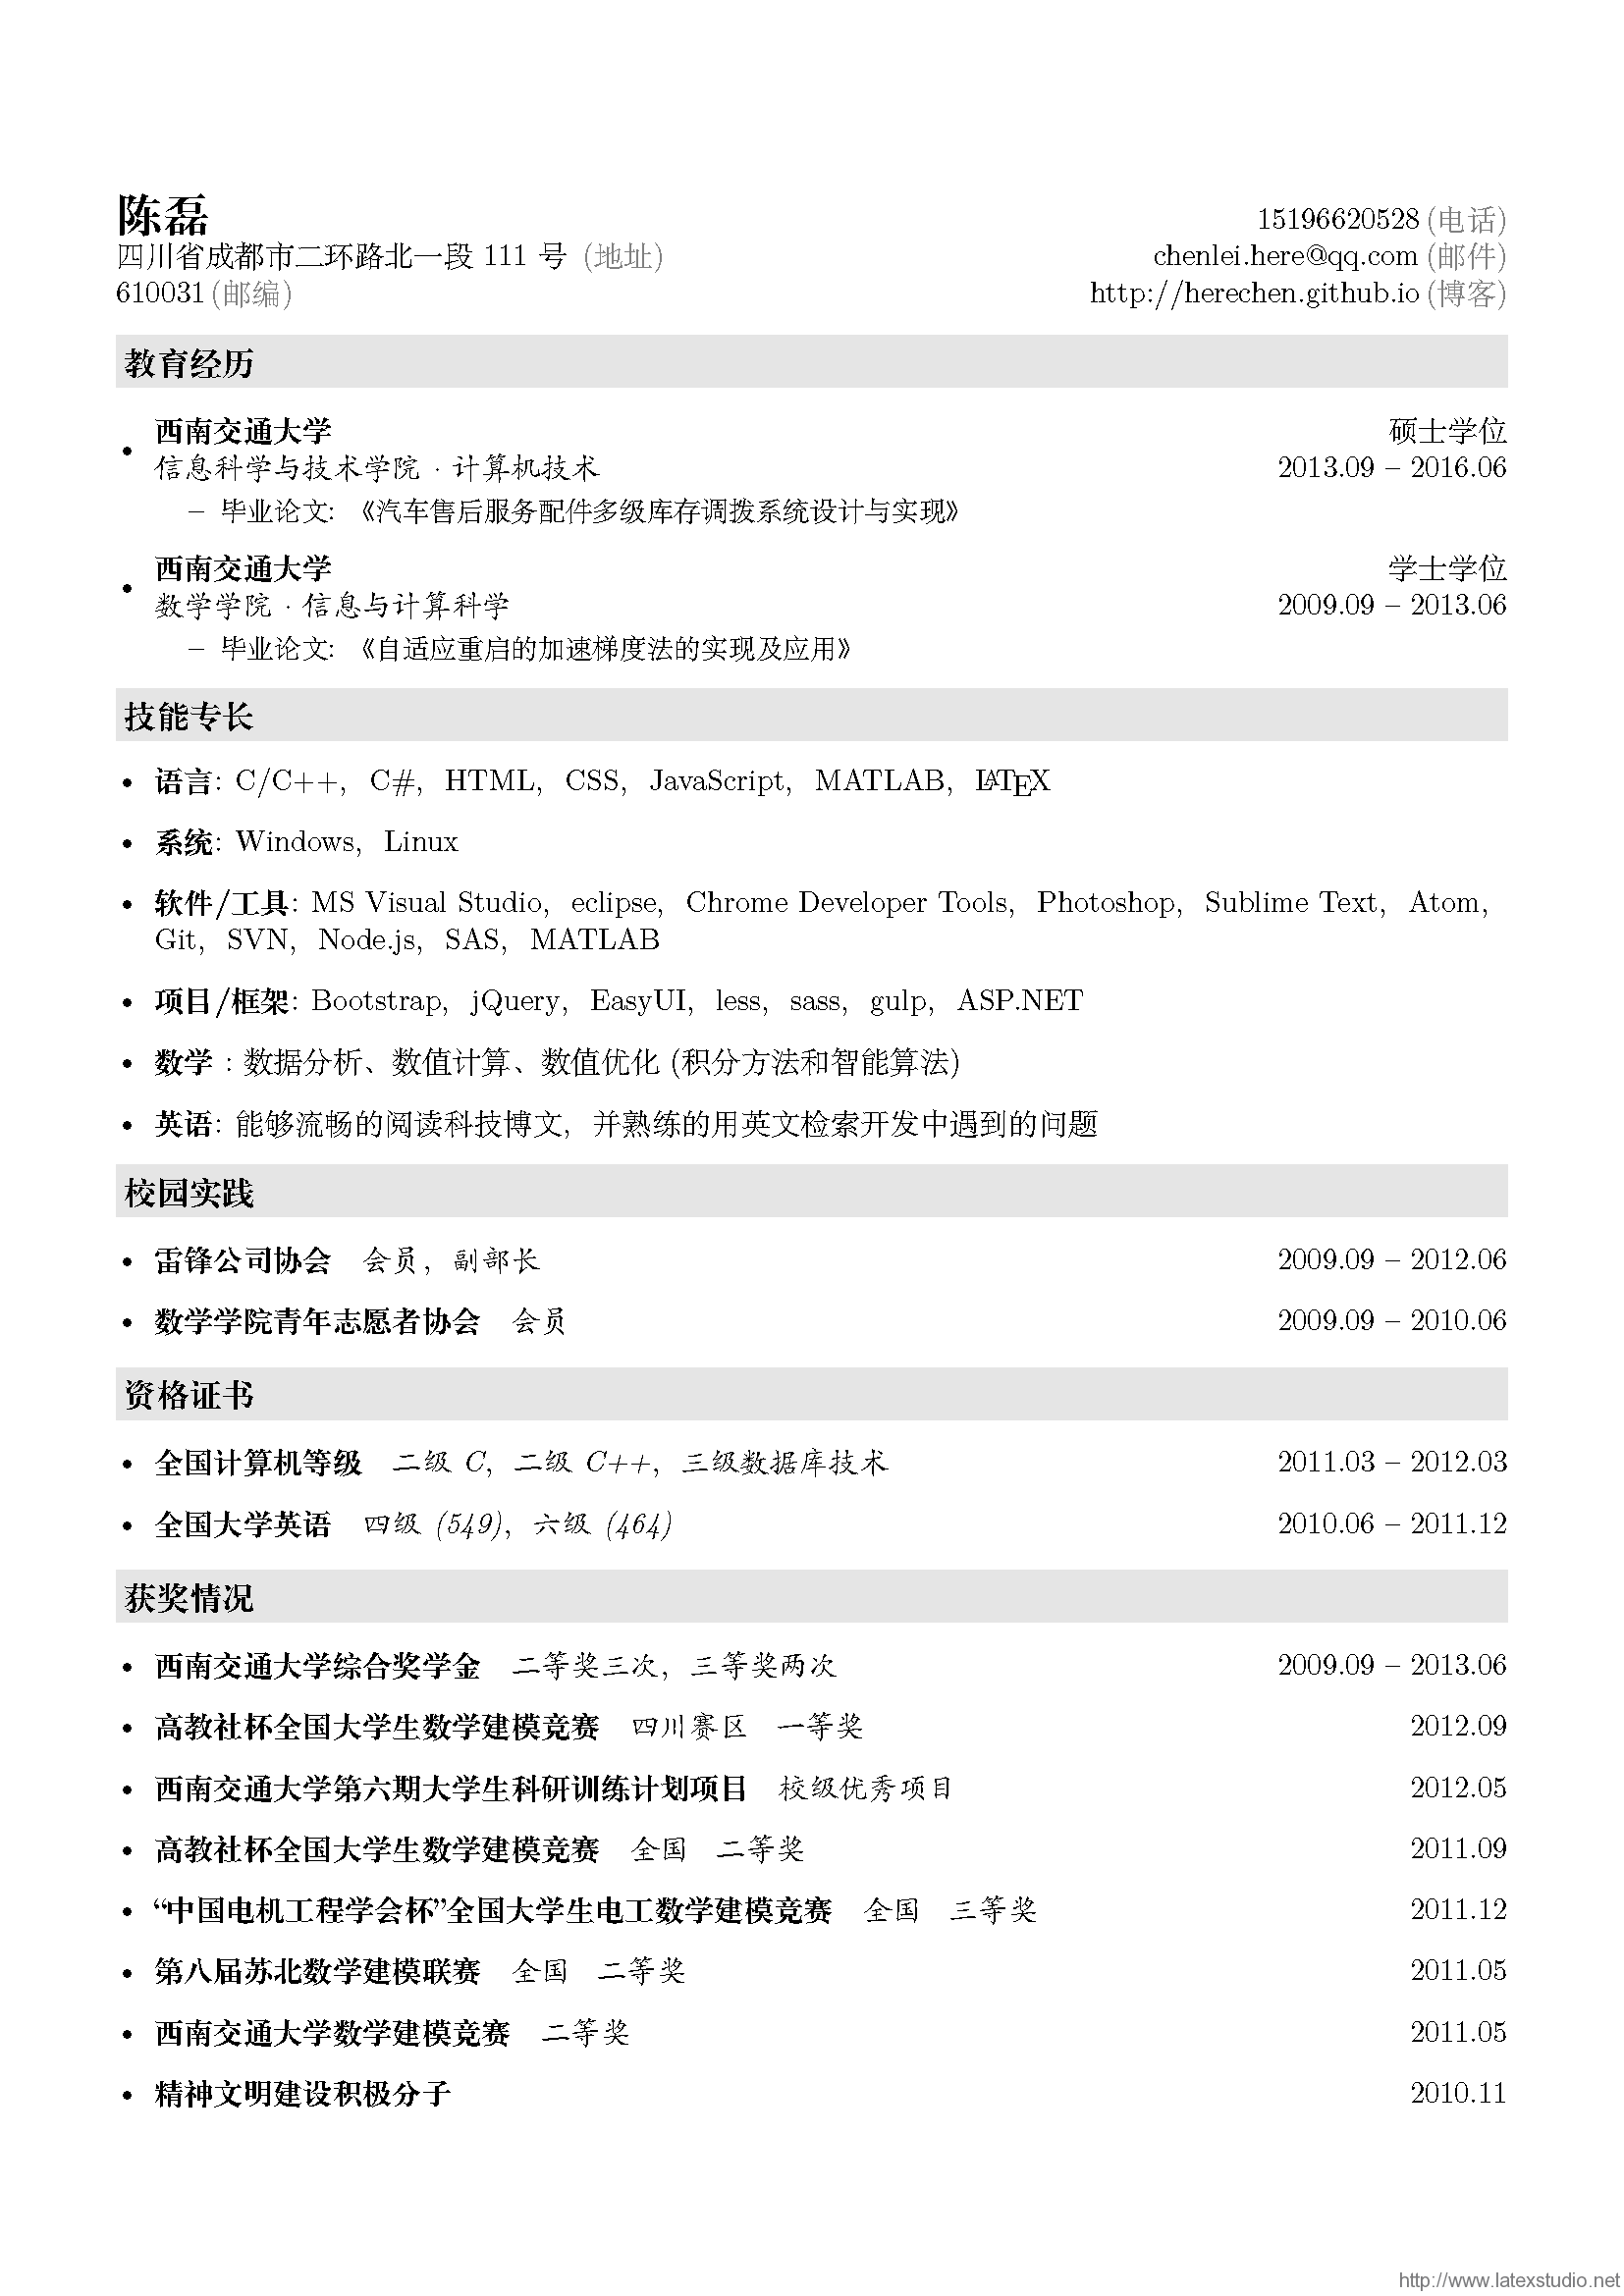 resume_page_1